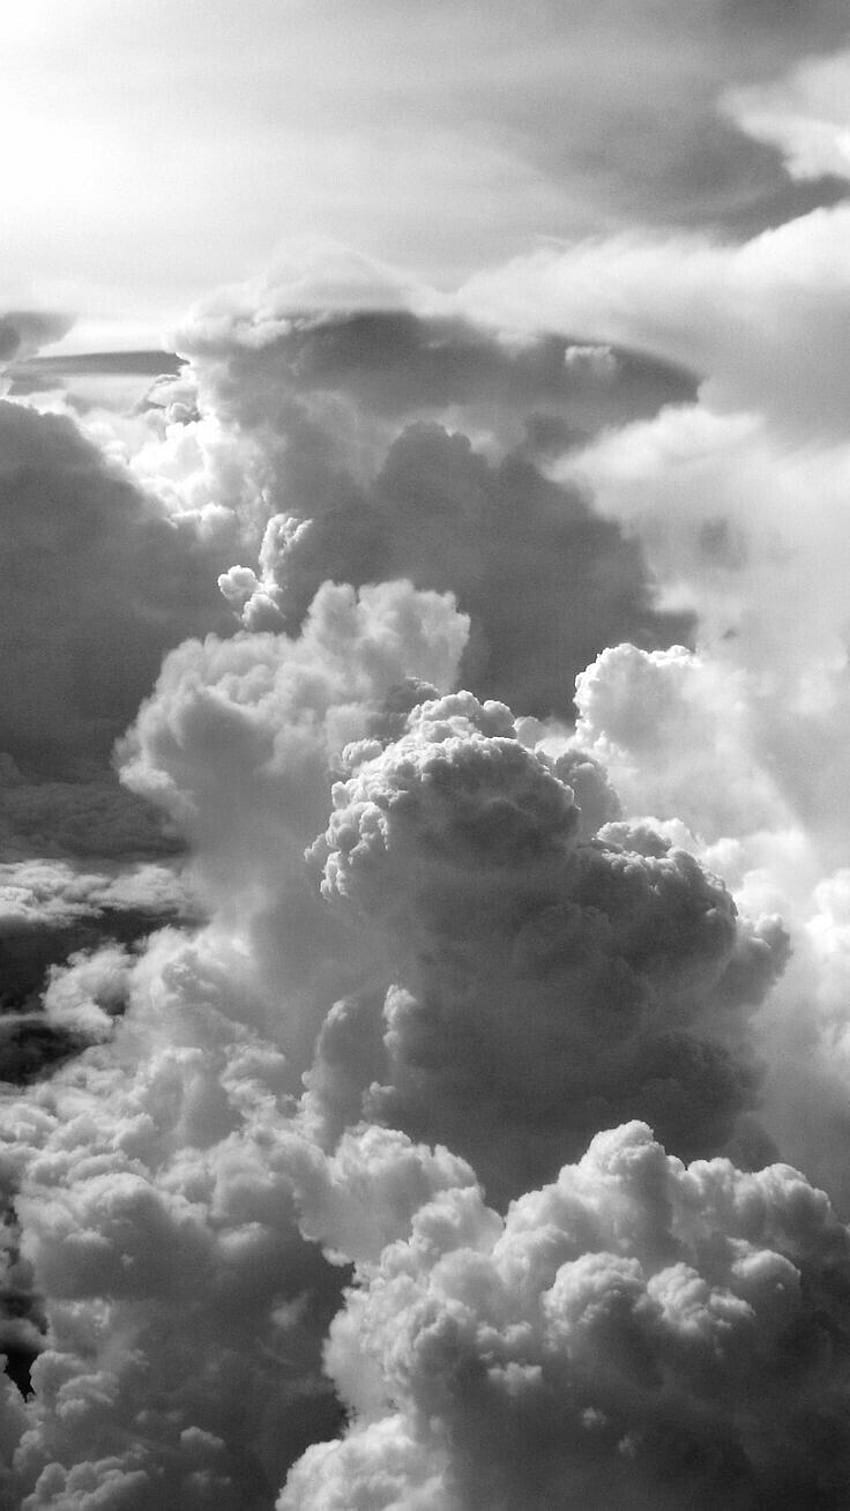 Summer Day Clouds  Black and White Photograph DSC01393  Black and white  clouds Black and white wallpaper iphone Black and white background